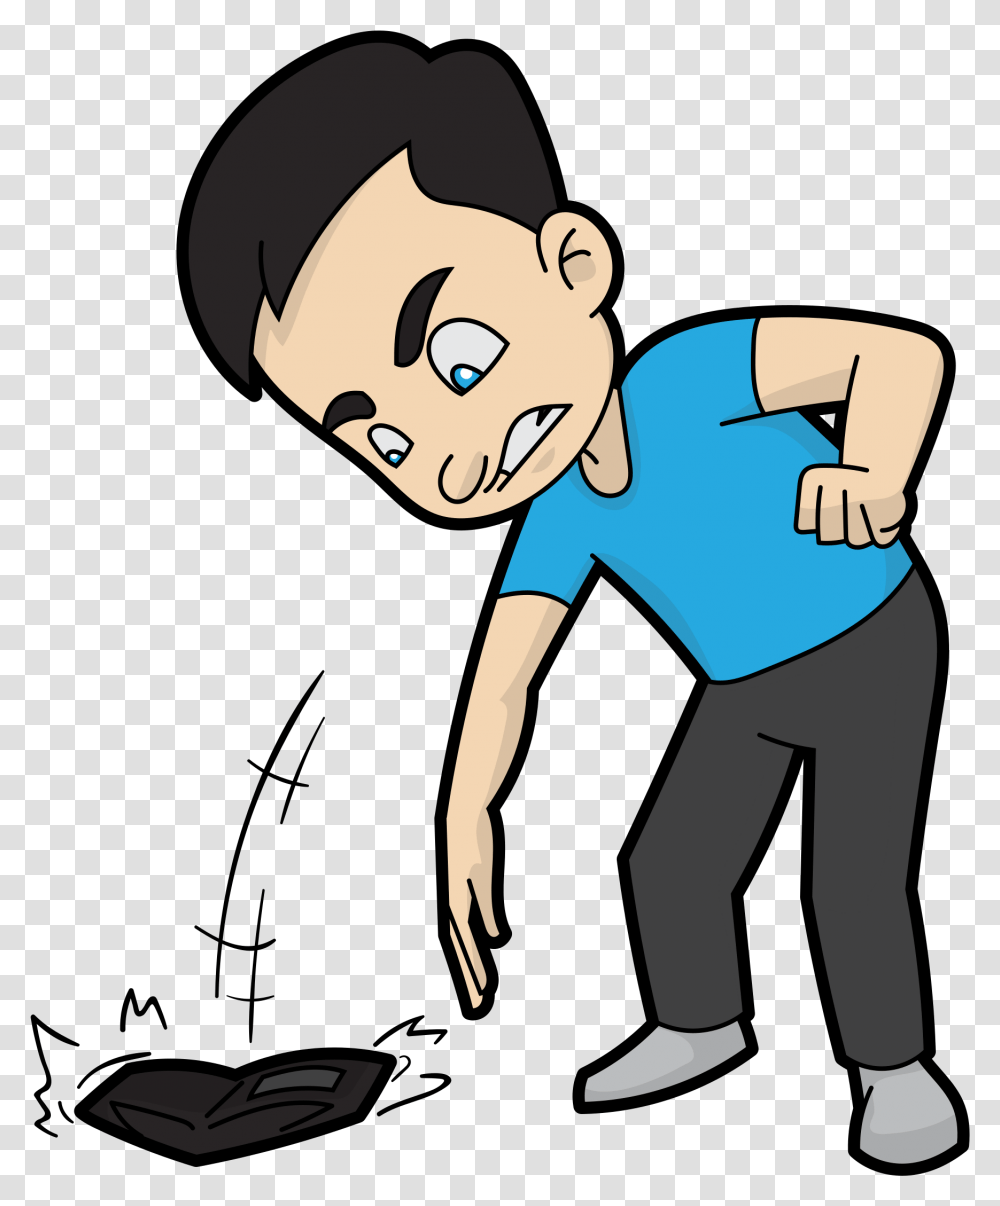 Filebankrupt And Angry Cartoon Mansvg Wikimedia Commons Angry Person Cartoon, Human, Standing, Outdoors, Sleeve Transparent Png